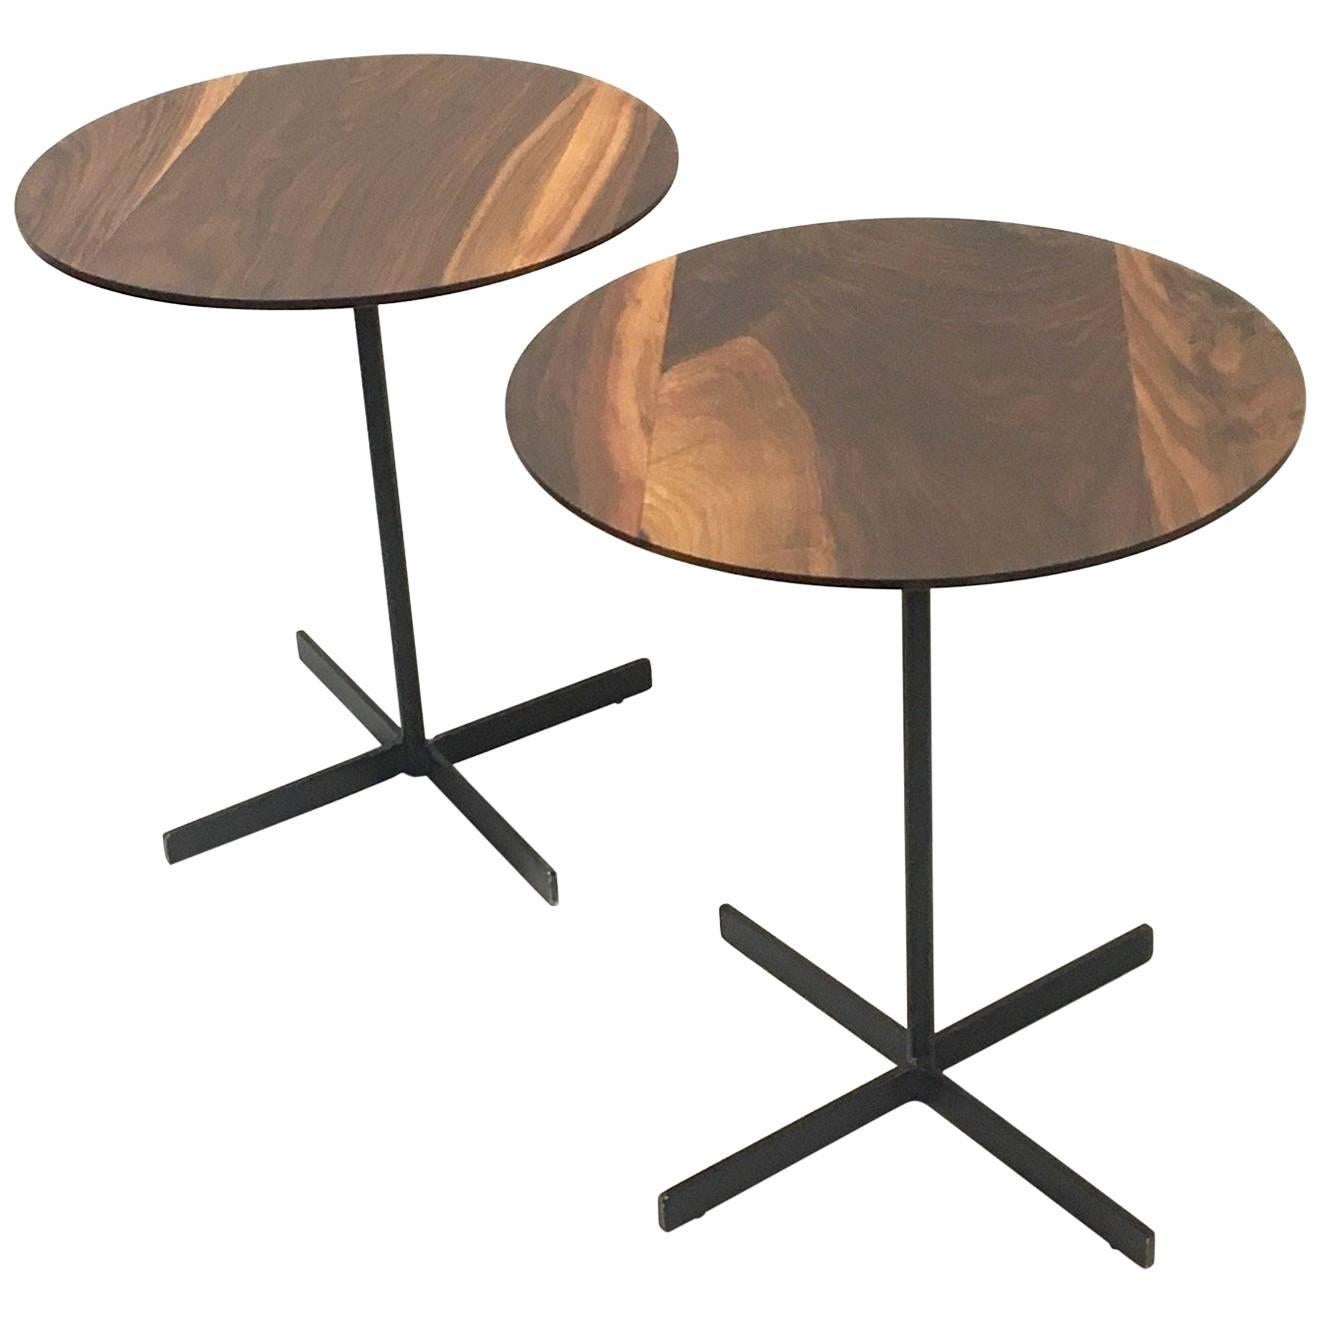 Pair of American Black Walnut Cocktail Tables with Iron Bases